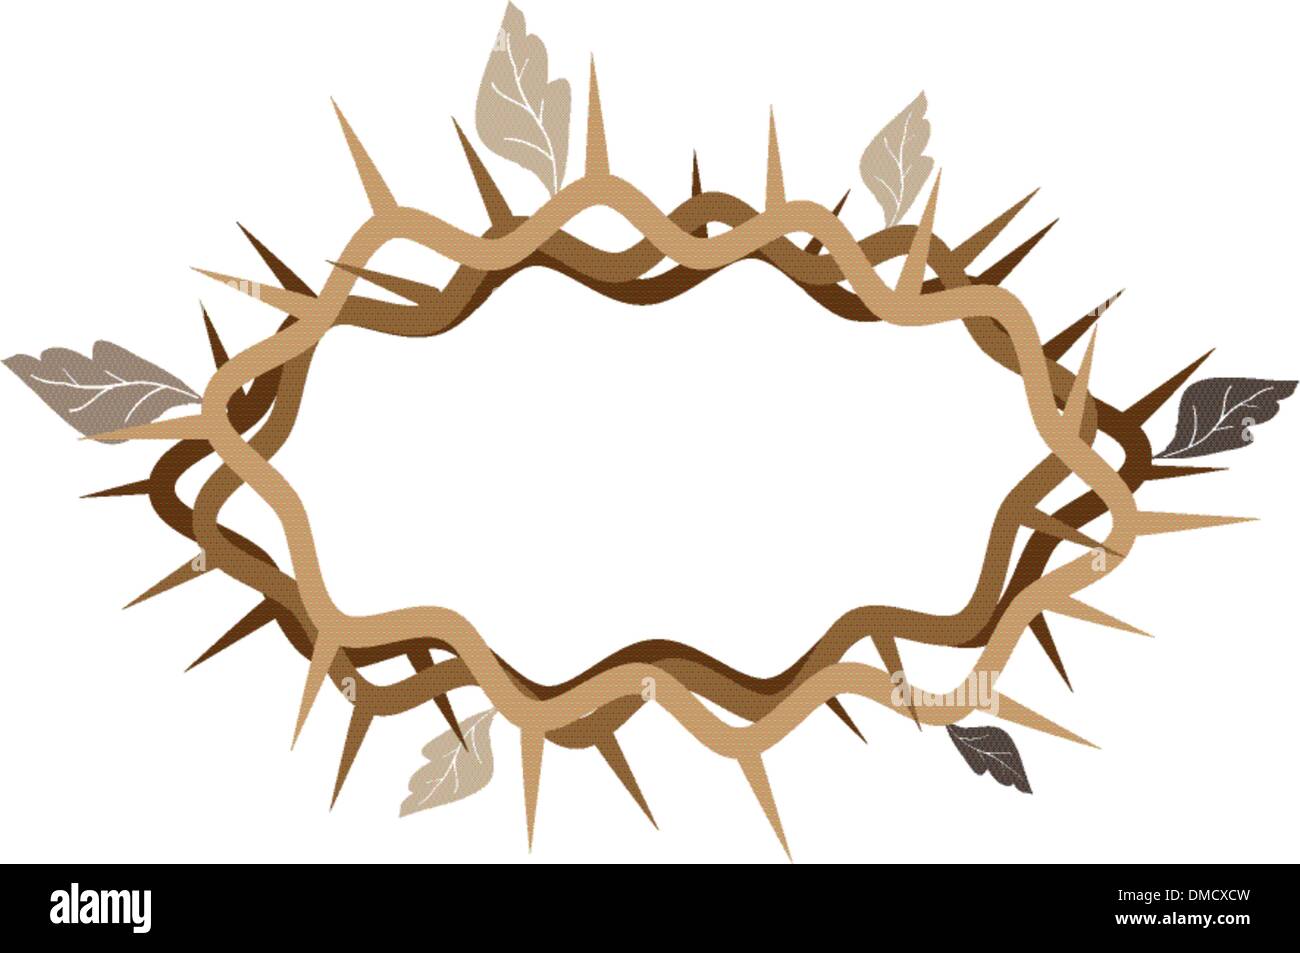 A Crown of Thorns with Dried Leaves Stock Vector